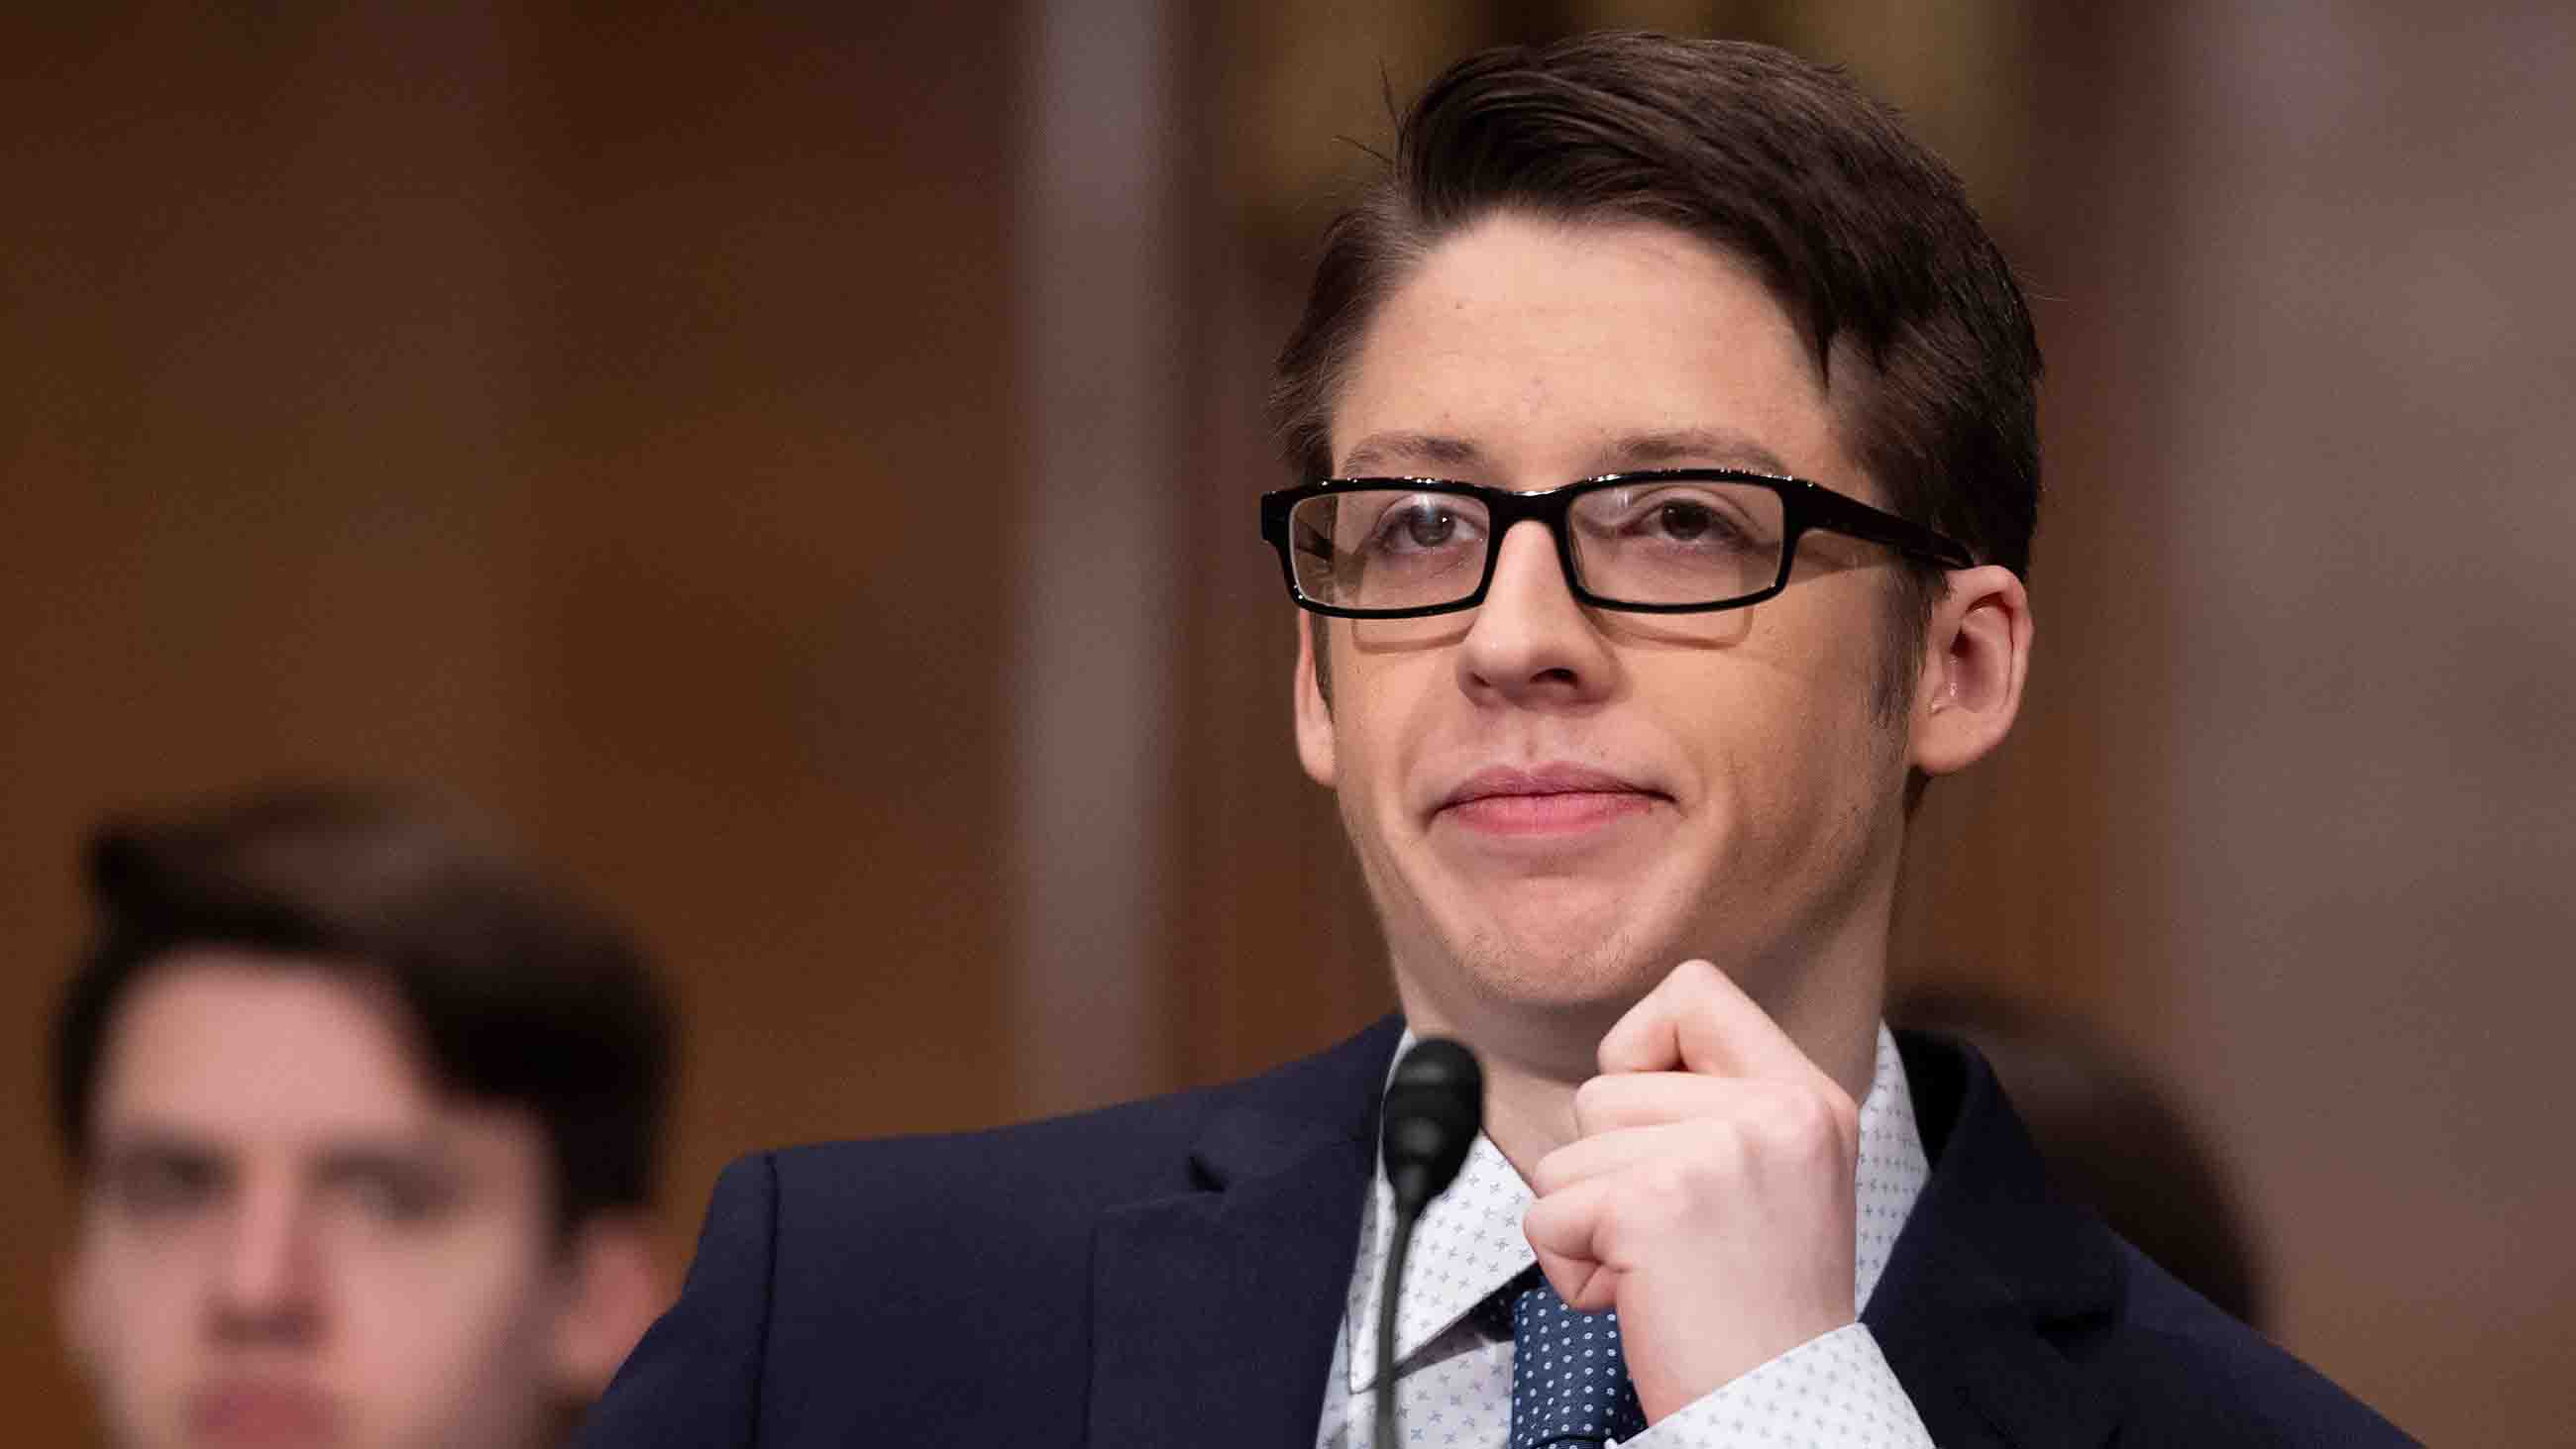 High school senior Ethan Lindenberger spoke about vaccine misinformation before the Senate Committee on Health, Education, Labor and Pensions on Tuesday.